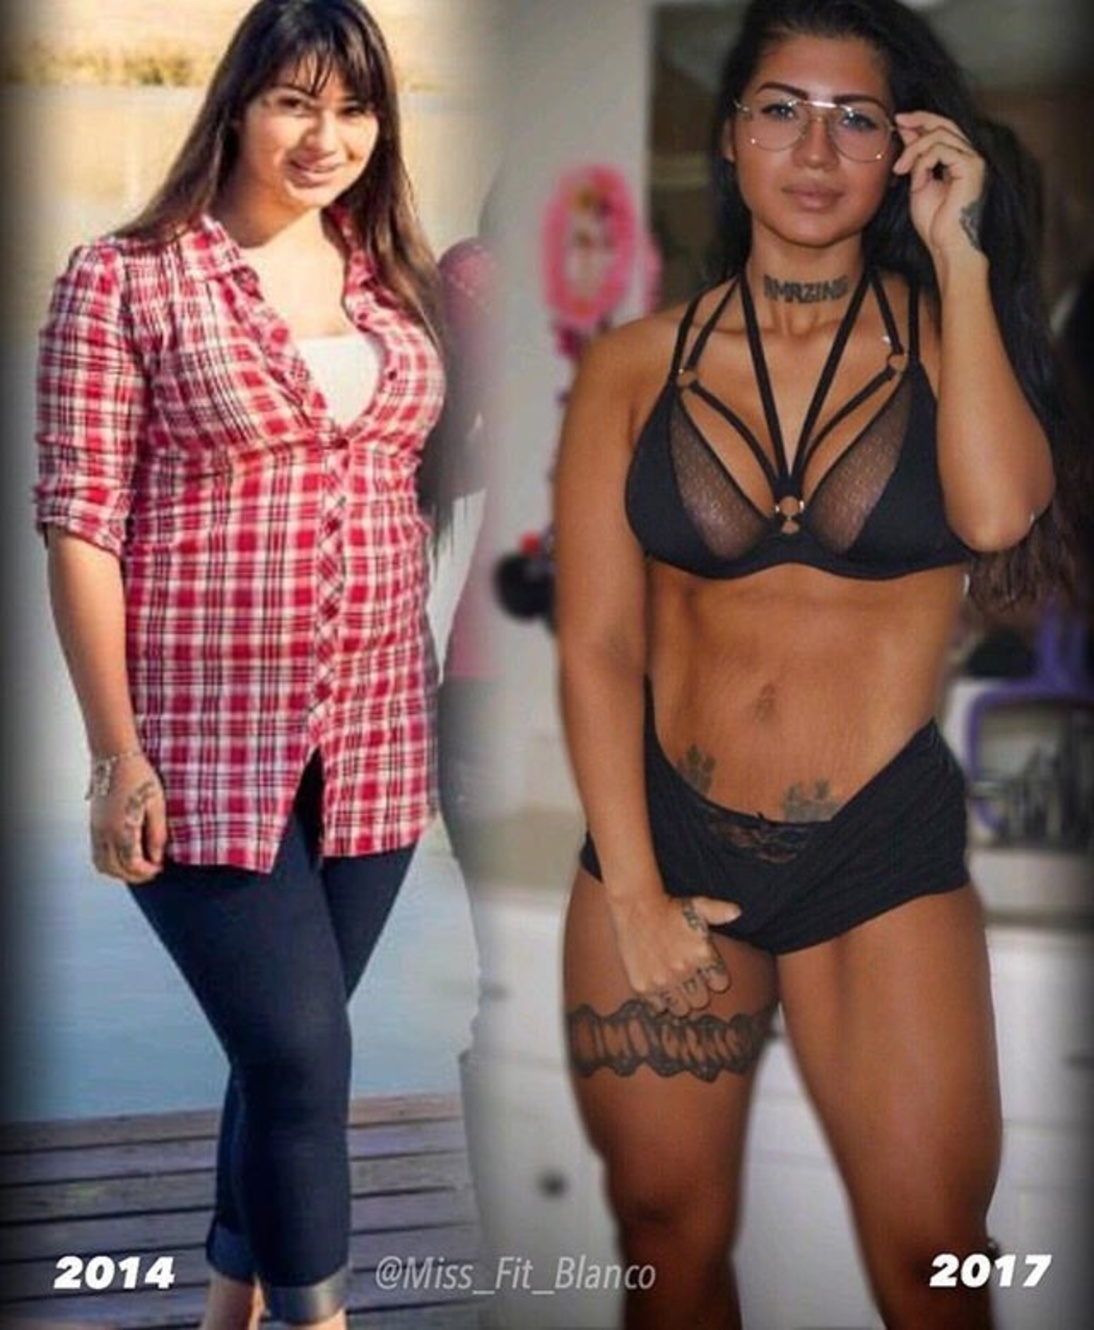 before and after weight loss photos